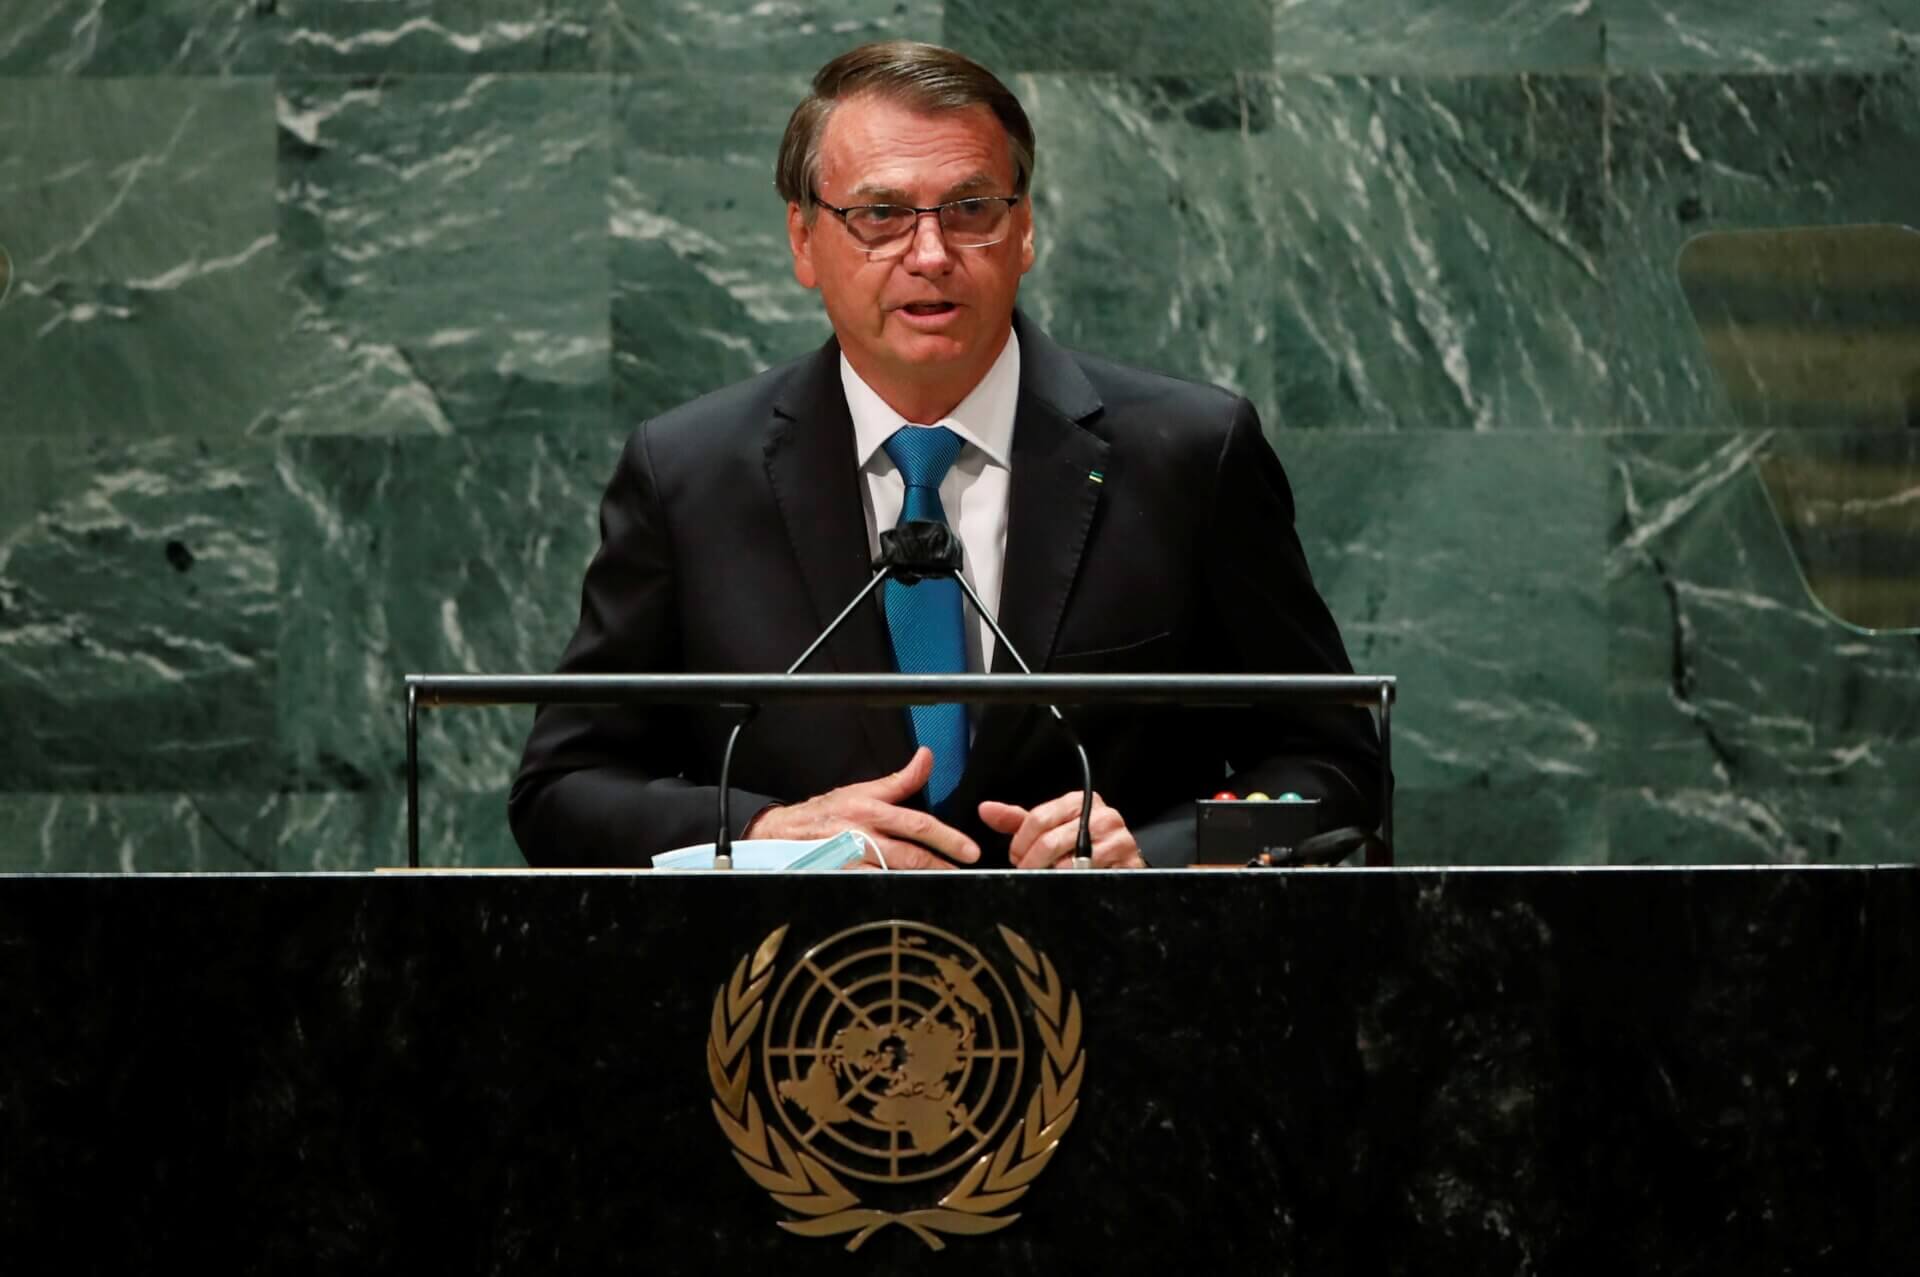 SUMMARY: UNGA Addresses by the Leaders of Brazil, Colombia, and Chile